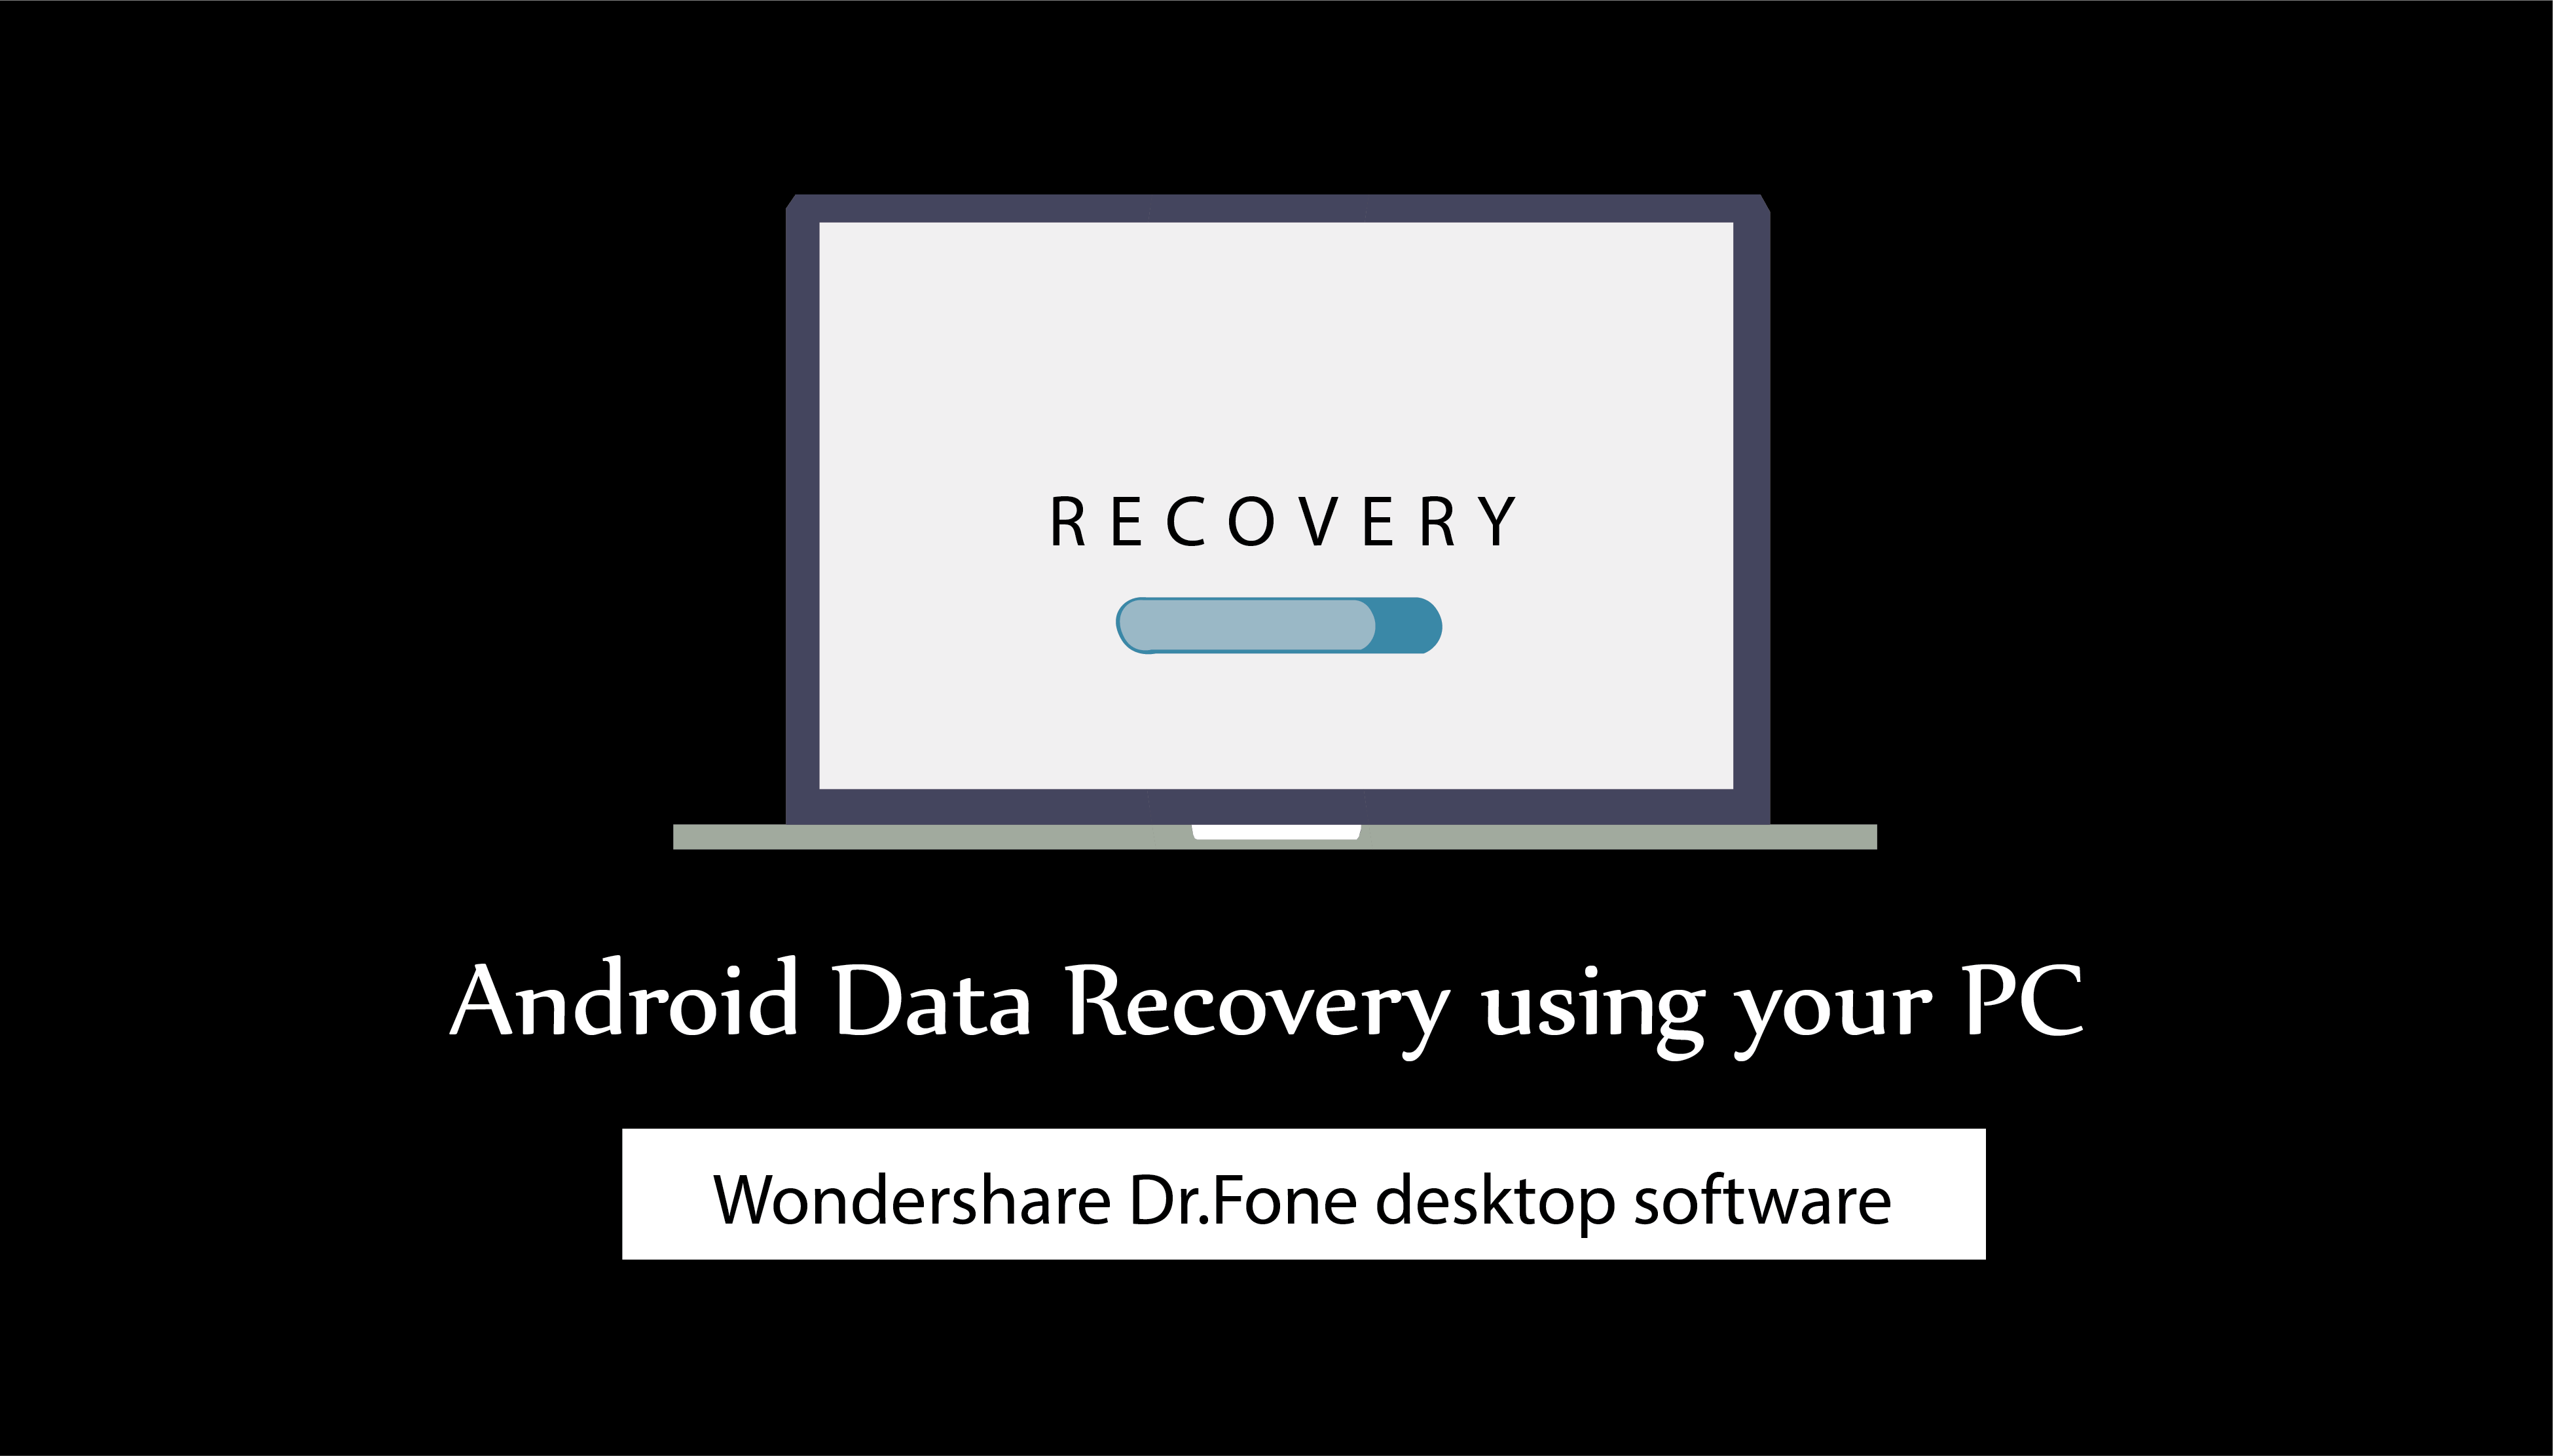 Wondershare Dr.Fone desktop software፡ our software recommendation for Data Recovery (Android)